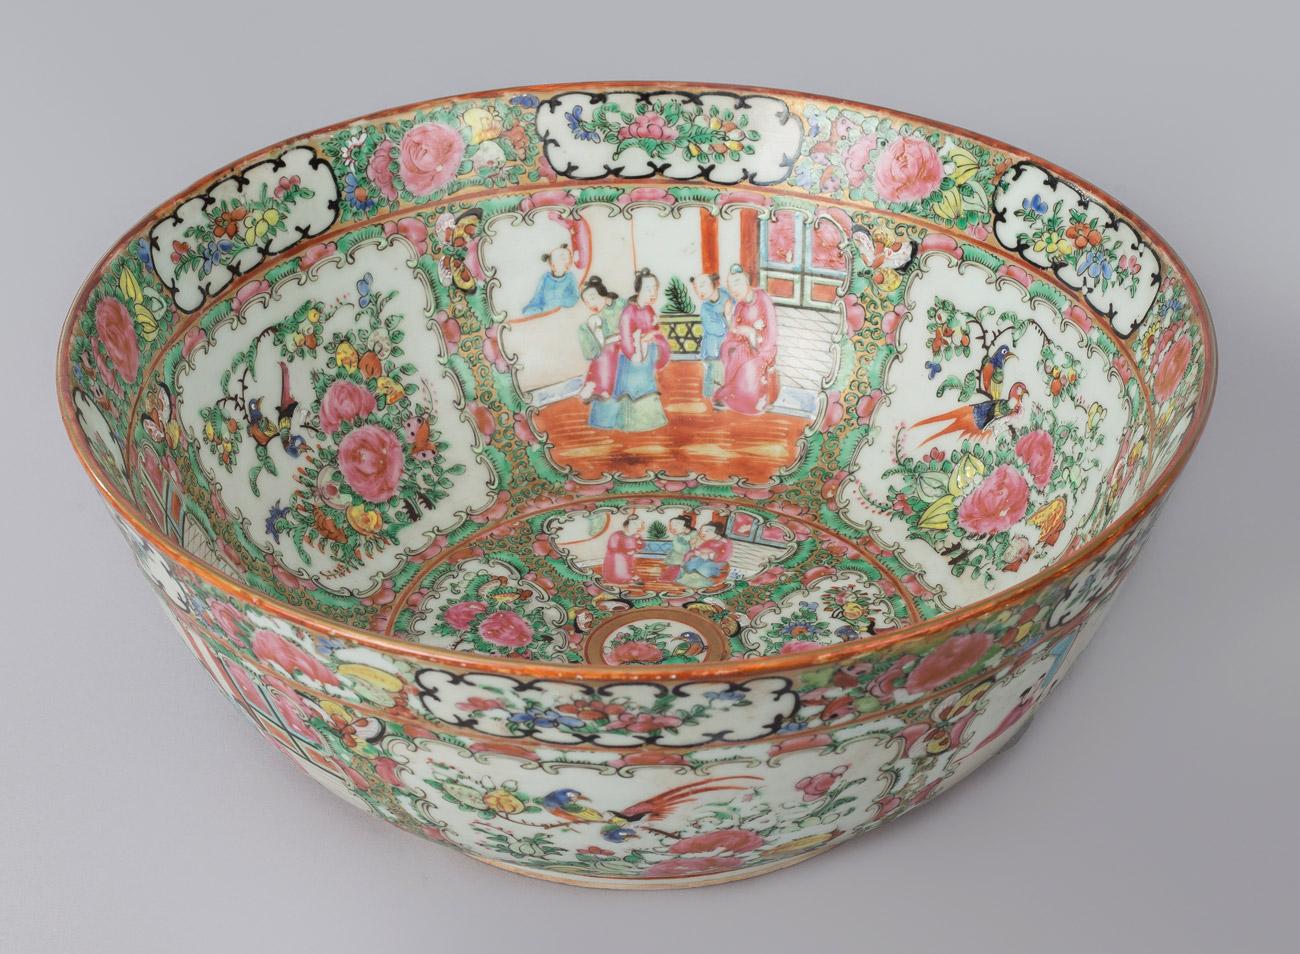 Chinese export Rose Medallion porcelain and enameled punch bowl in the famille rose palette decorated with exterior and interior alternating panels of courtly ladies in palace scenes and garden flowers and parrots, framed by bands of foliage and